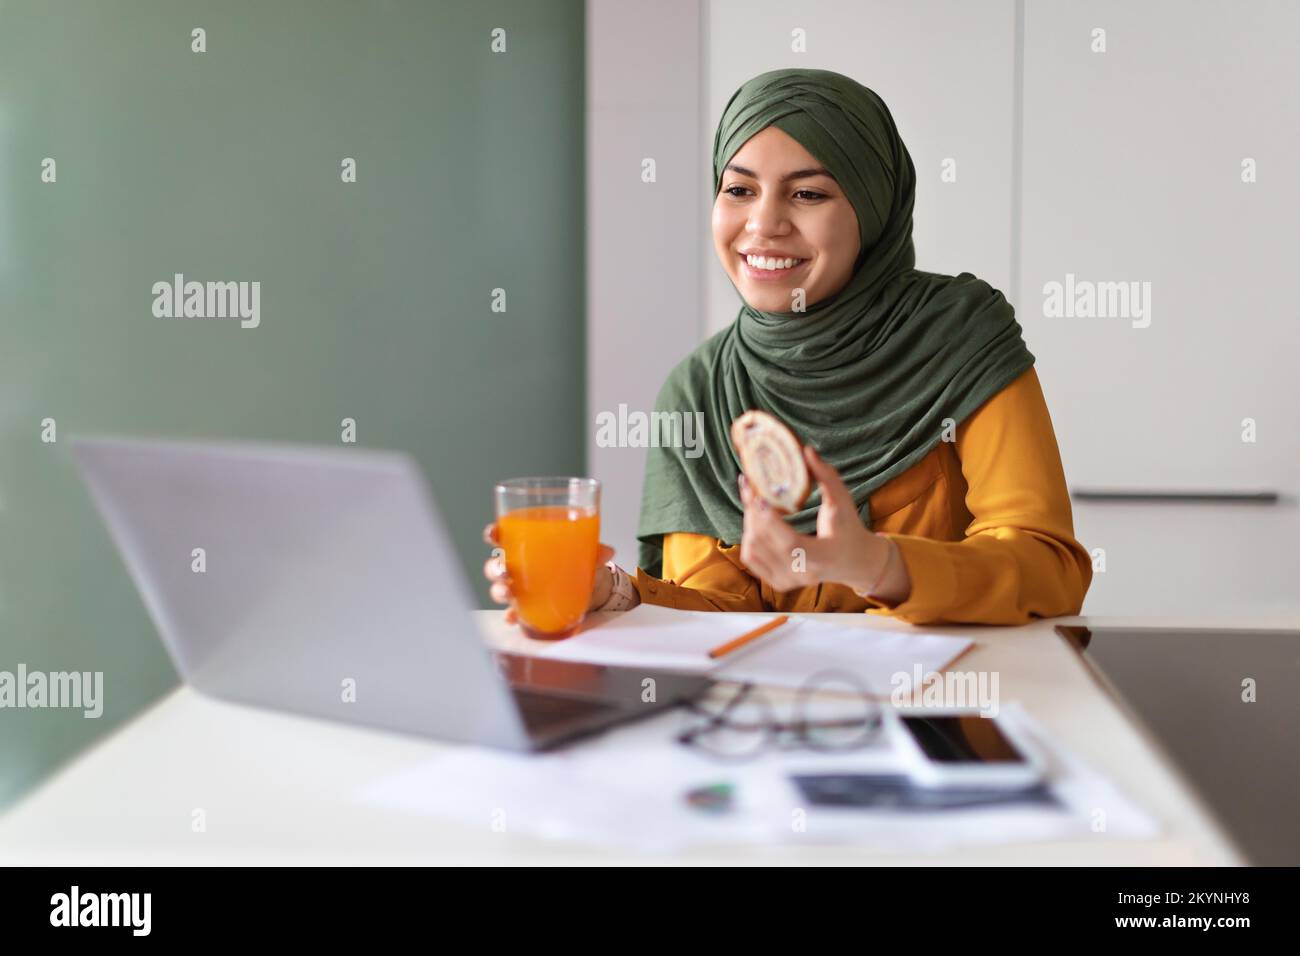 Young Muslim Woman Eating Snacks In Front Of Laptop At Home Stock Photo